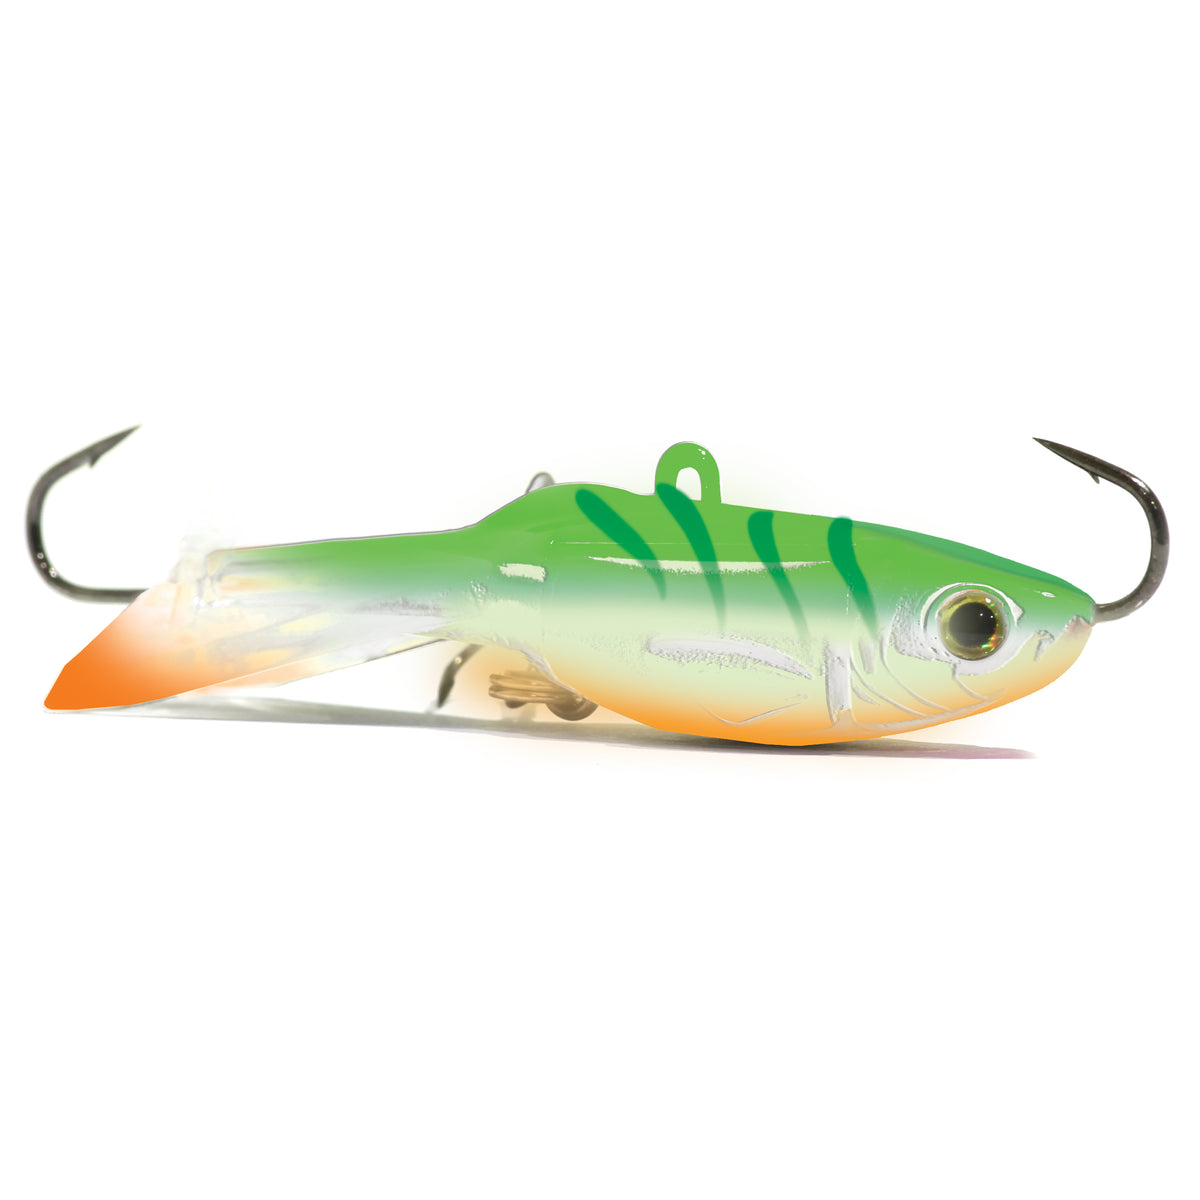 ACME Hyper-Glide - Extreme Tackle